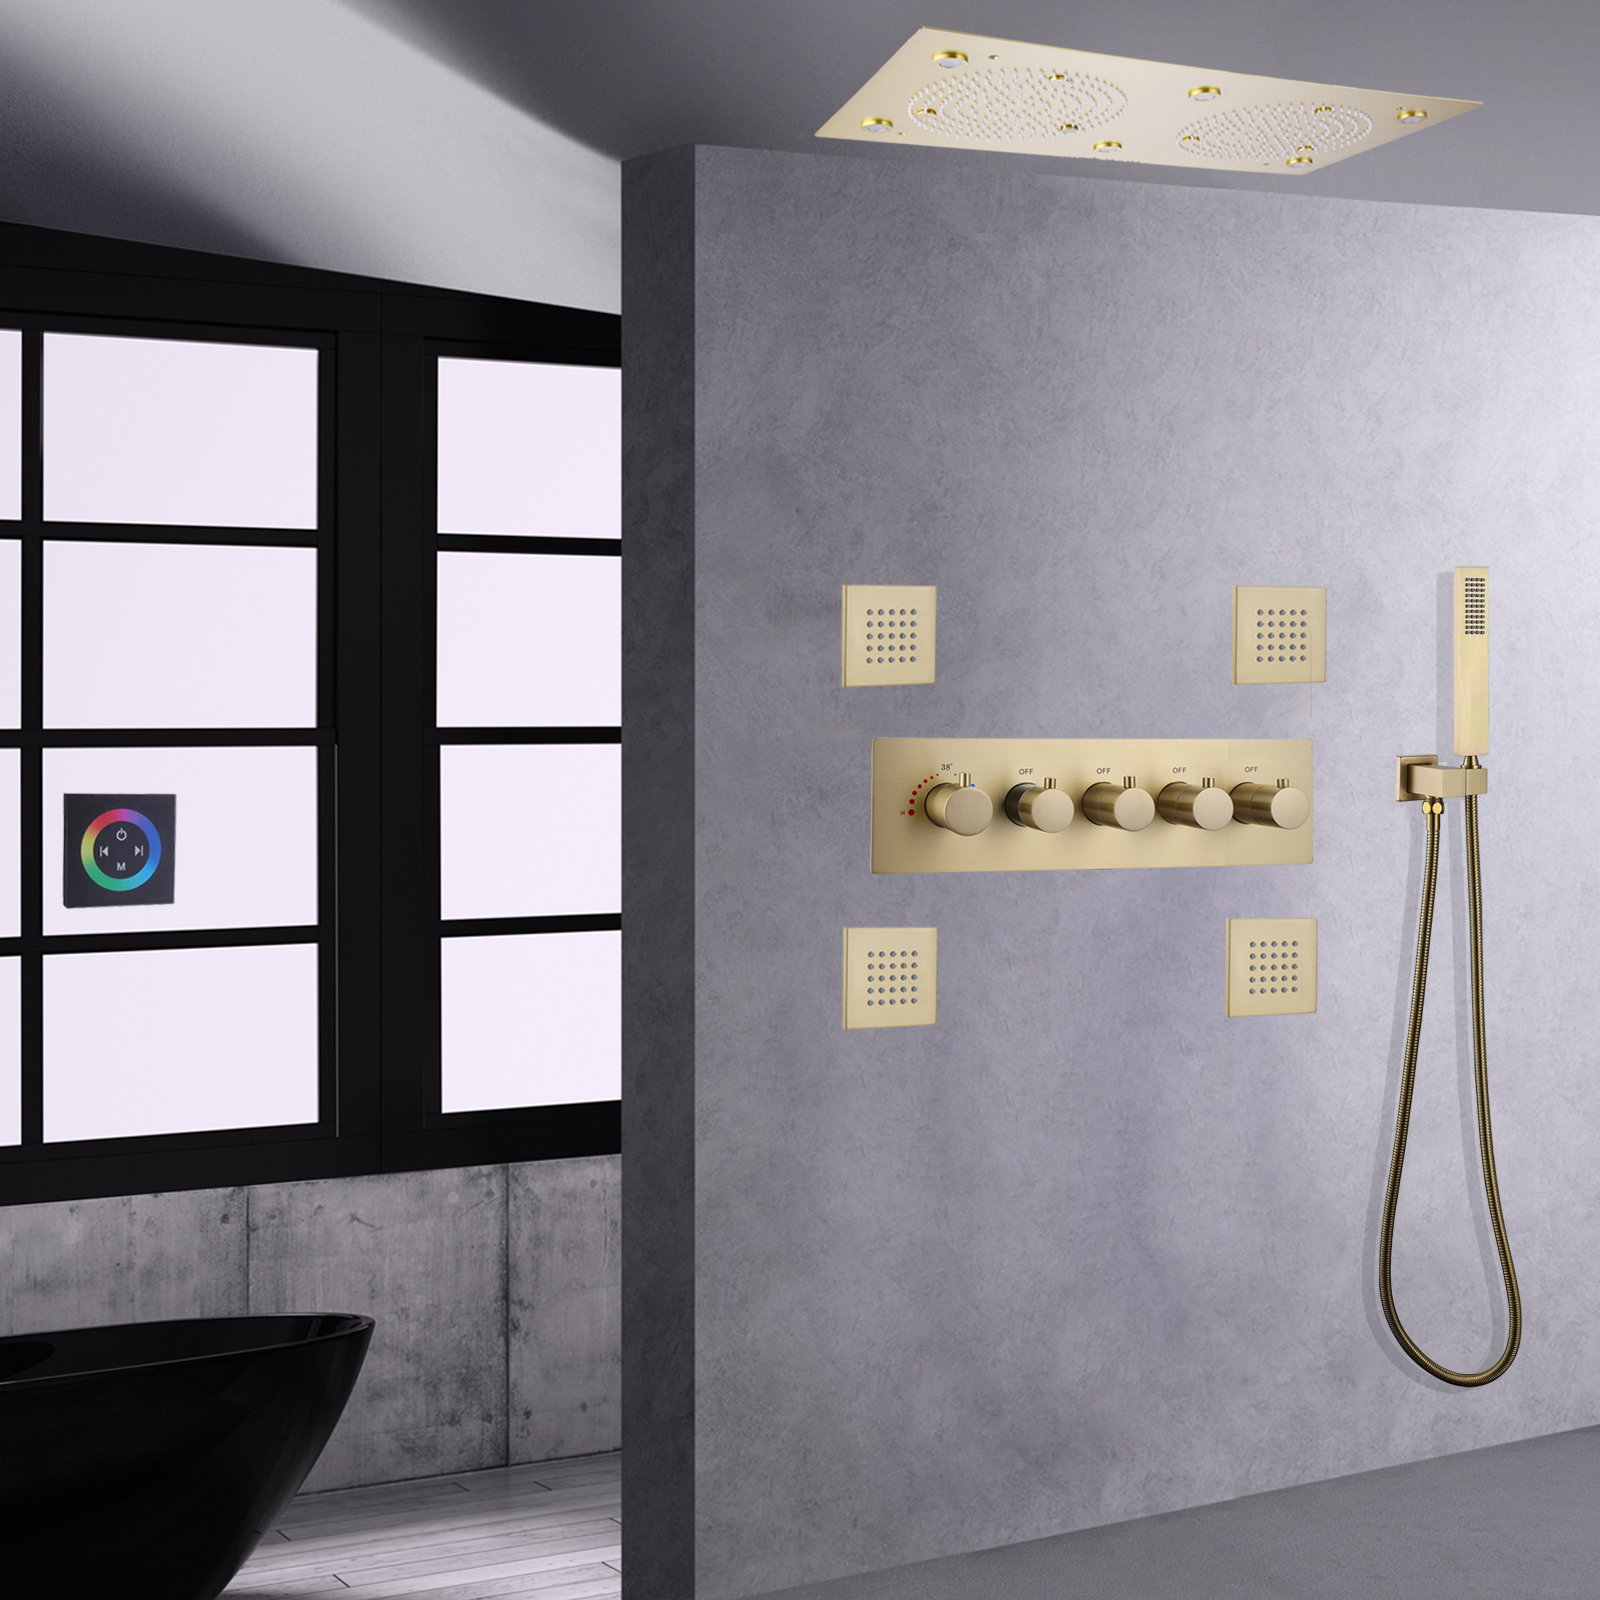 Brushed Gold Thermostatic Shower Head Rainfall LED Bathroom Bath Shower Faucet Set With Handheld Hose